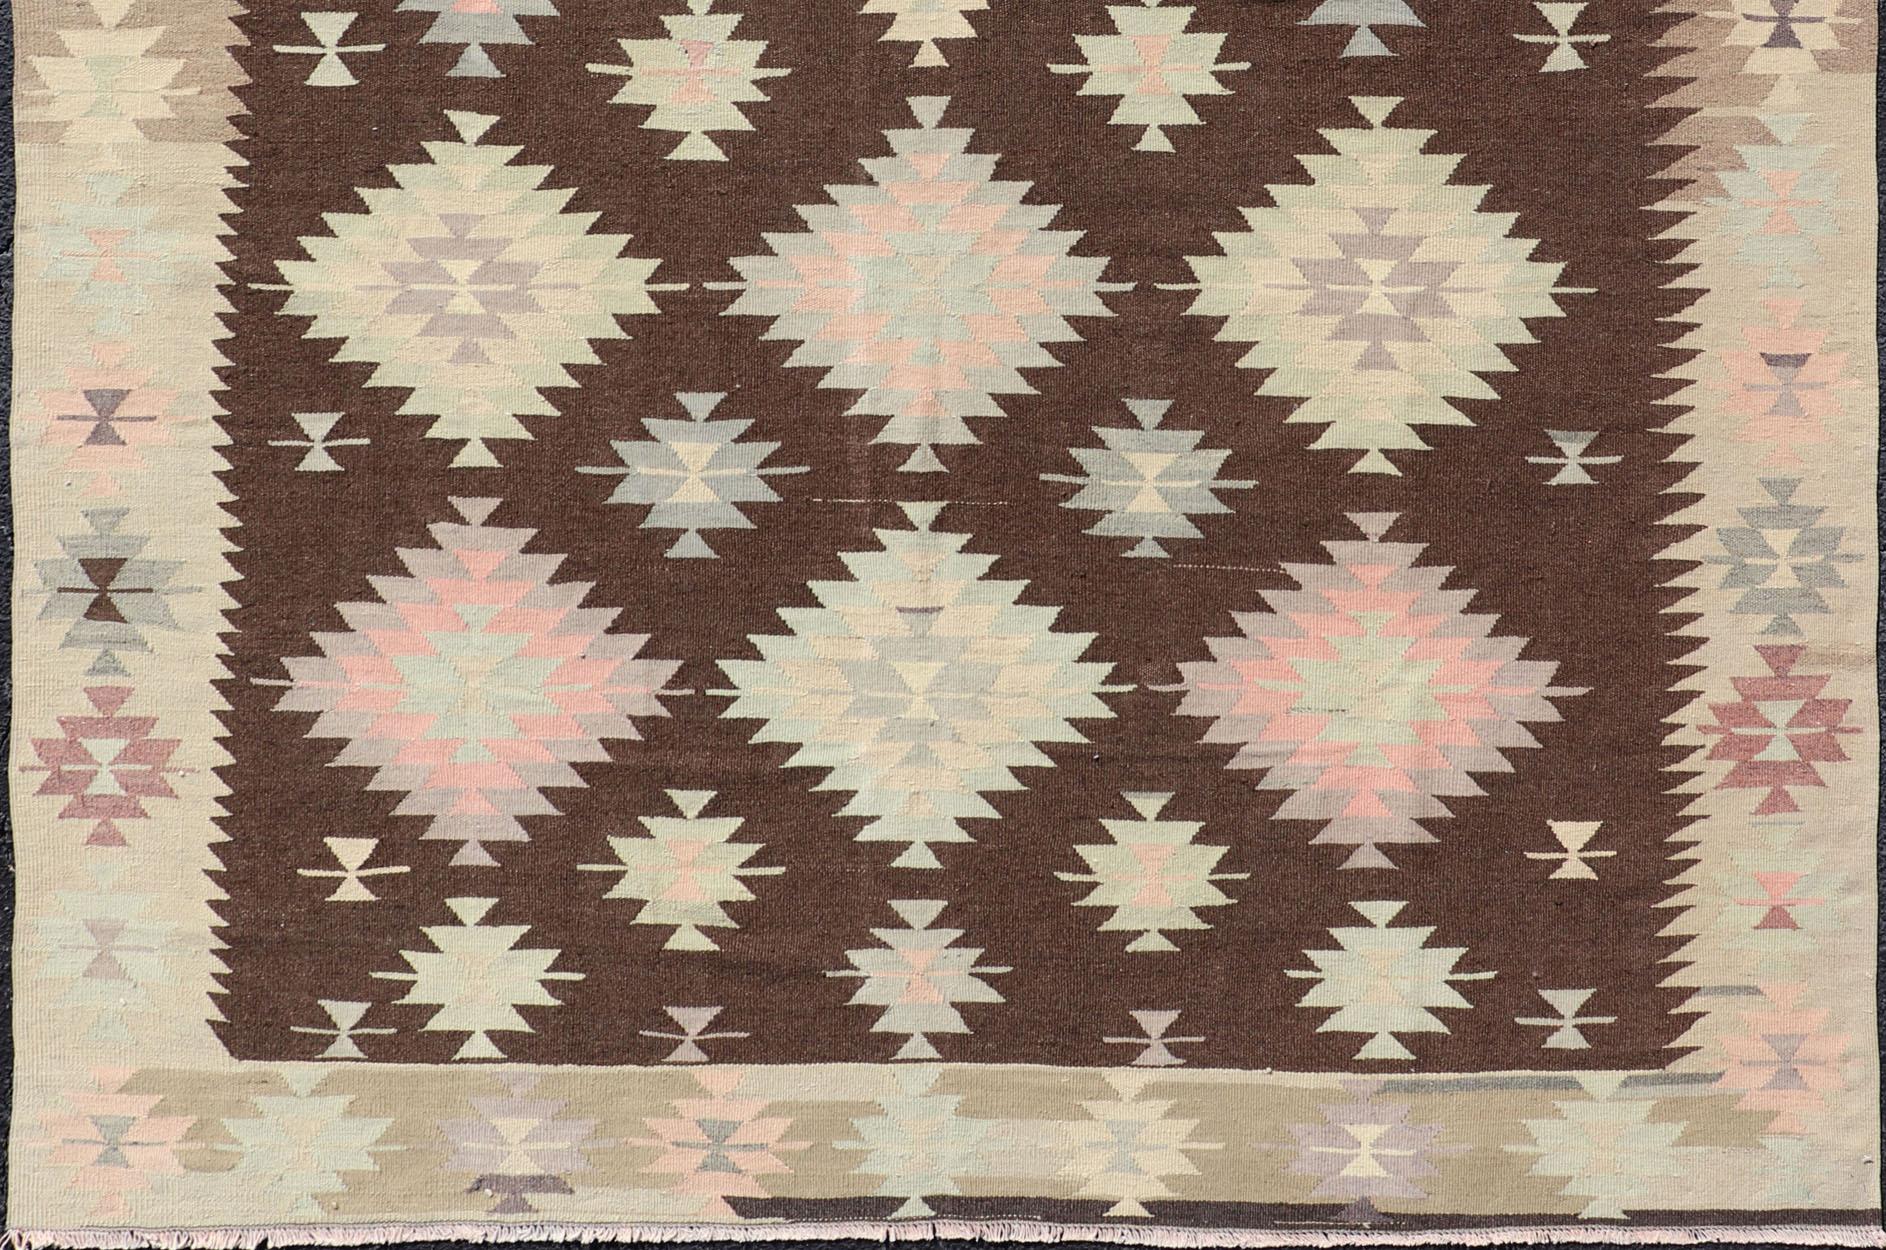 Tribal and Geometrics Turkish Kilim in Brown with Cream, Pink, Light Gray/Blue In Excellent Condition For Sale In Atlanta, GA